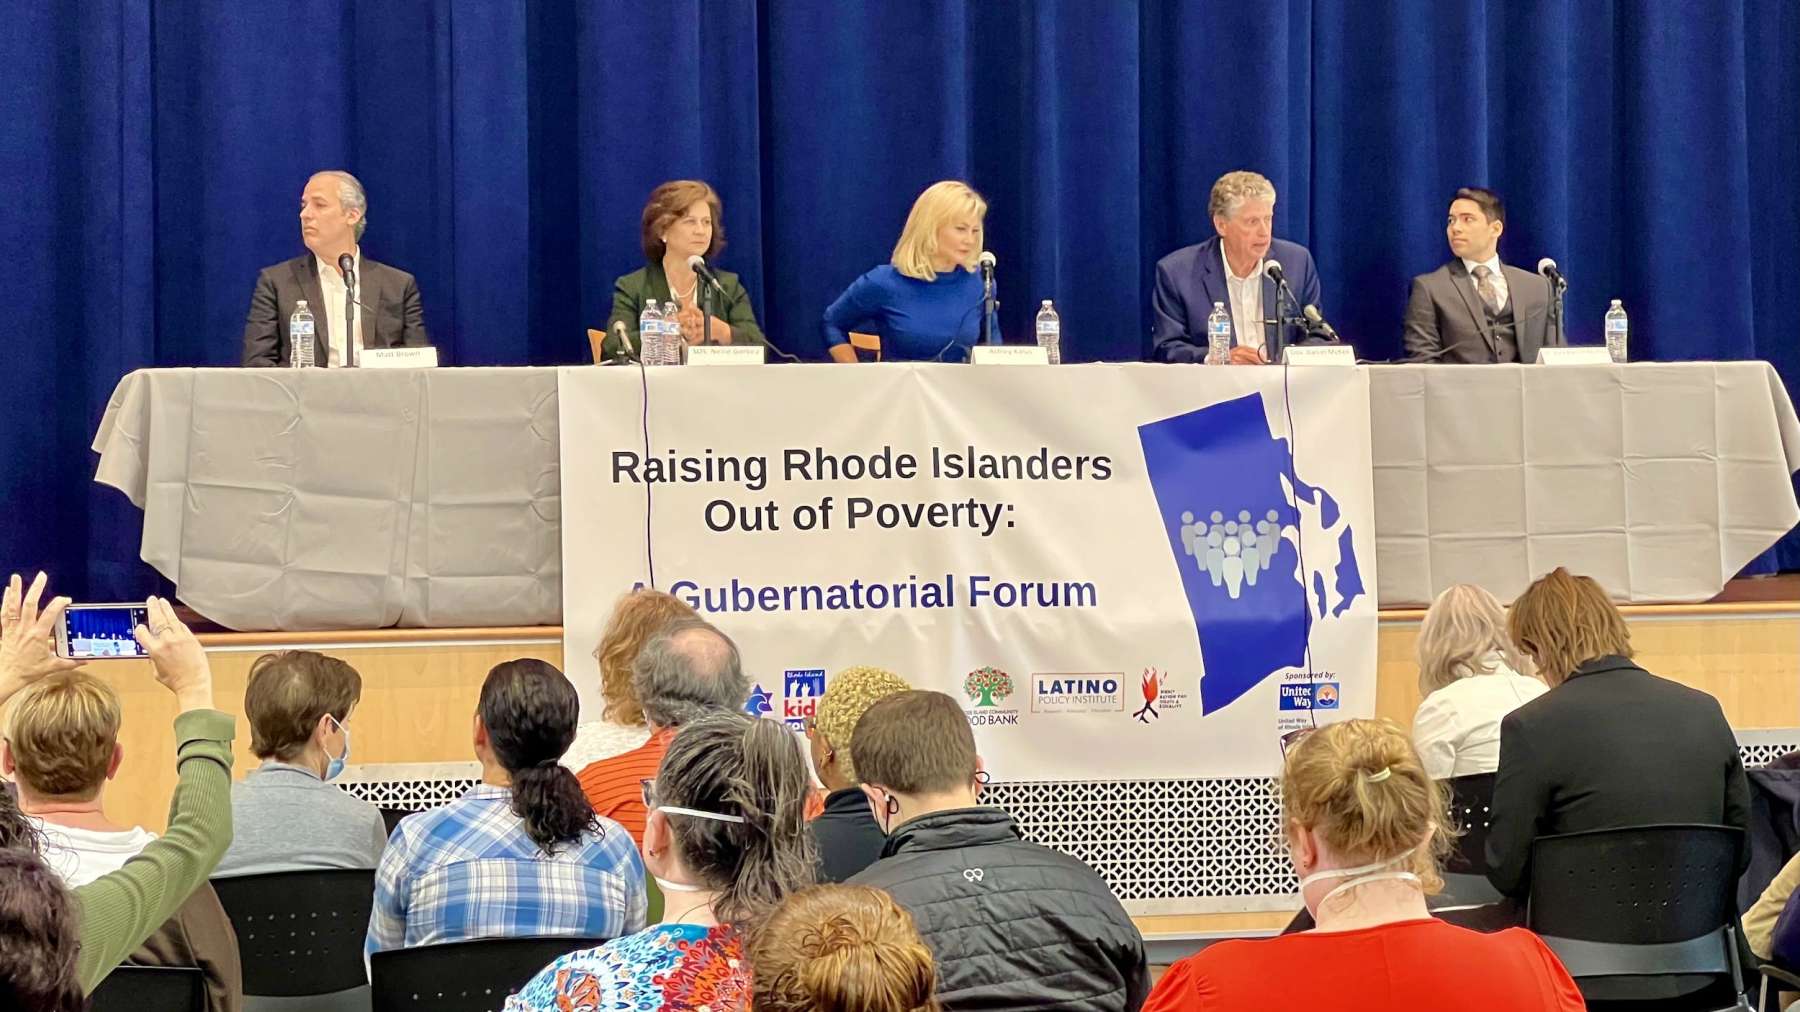 At forum, candidates for governor discuss raising Rhode Islanders out of poverty